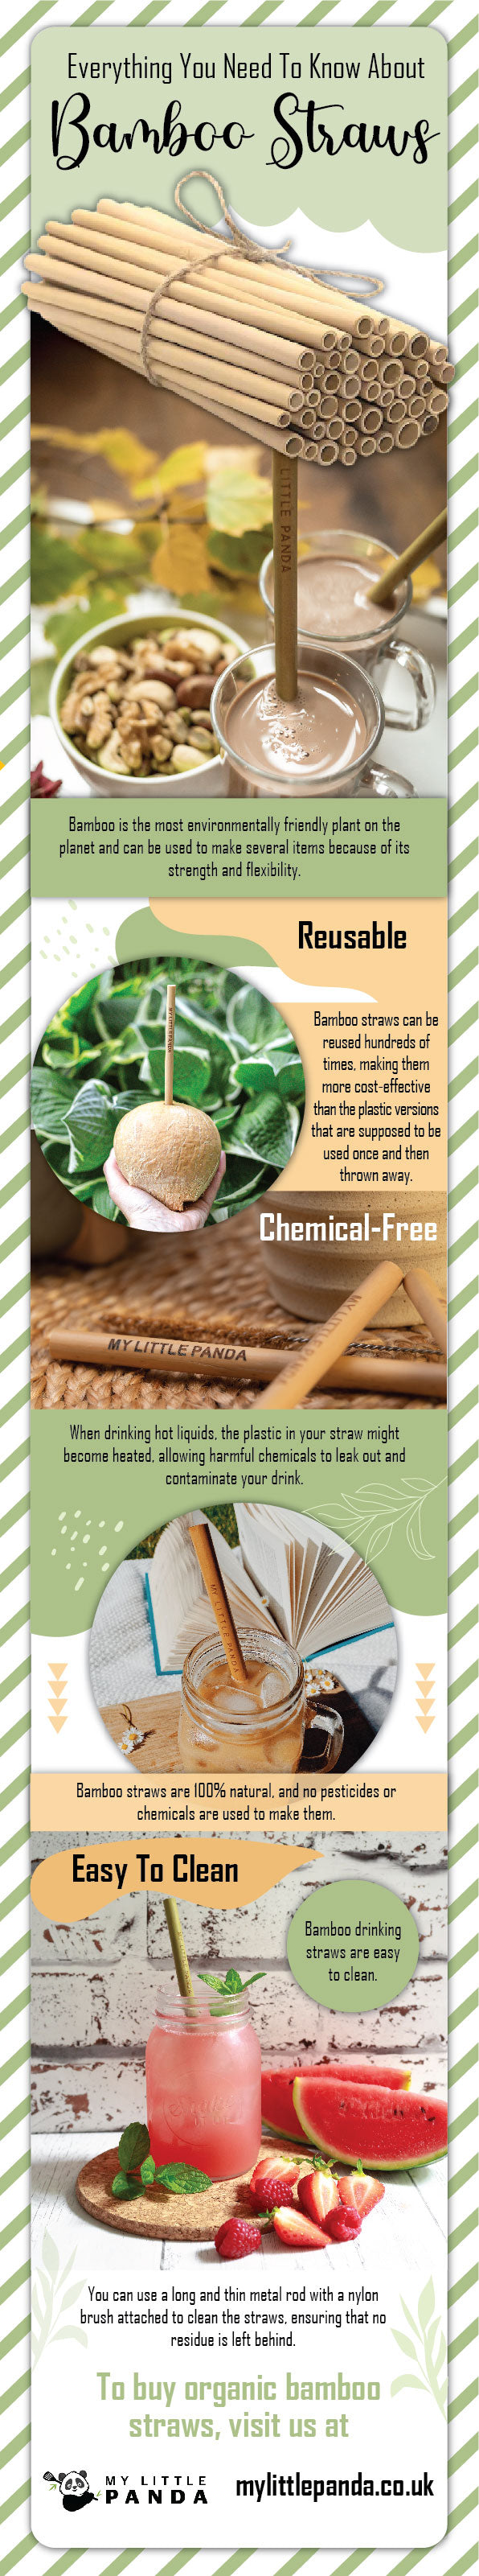 Everything You Need To Know About Bamboo Straws - Infograph